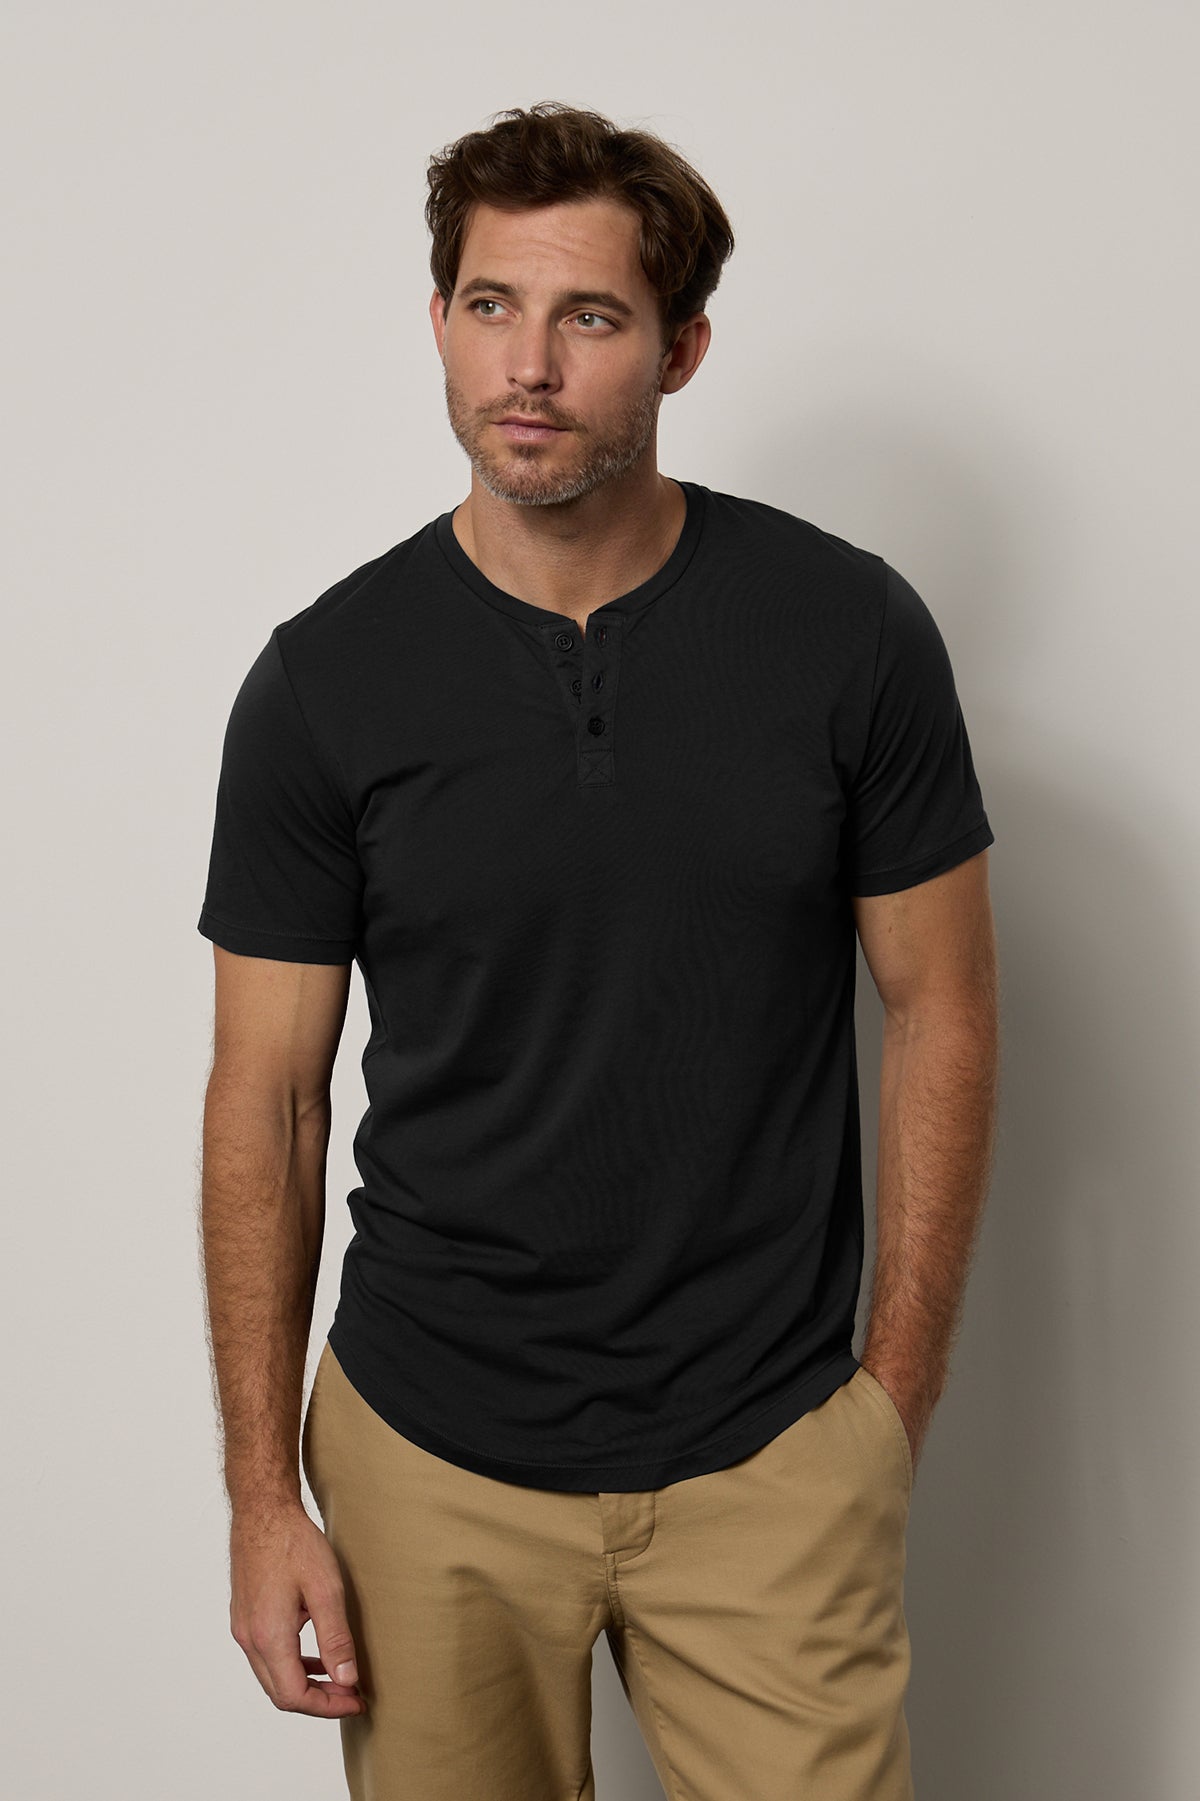   A man standing against a neutral background, wearing a black Fulton Henley tee by Velvet by Graham & Spencer with a curved hemline and beige pants, looking slightly to his left. 